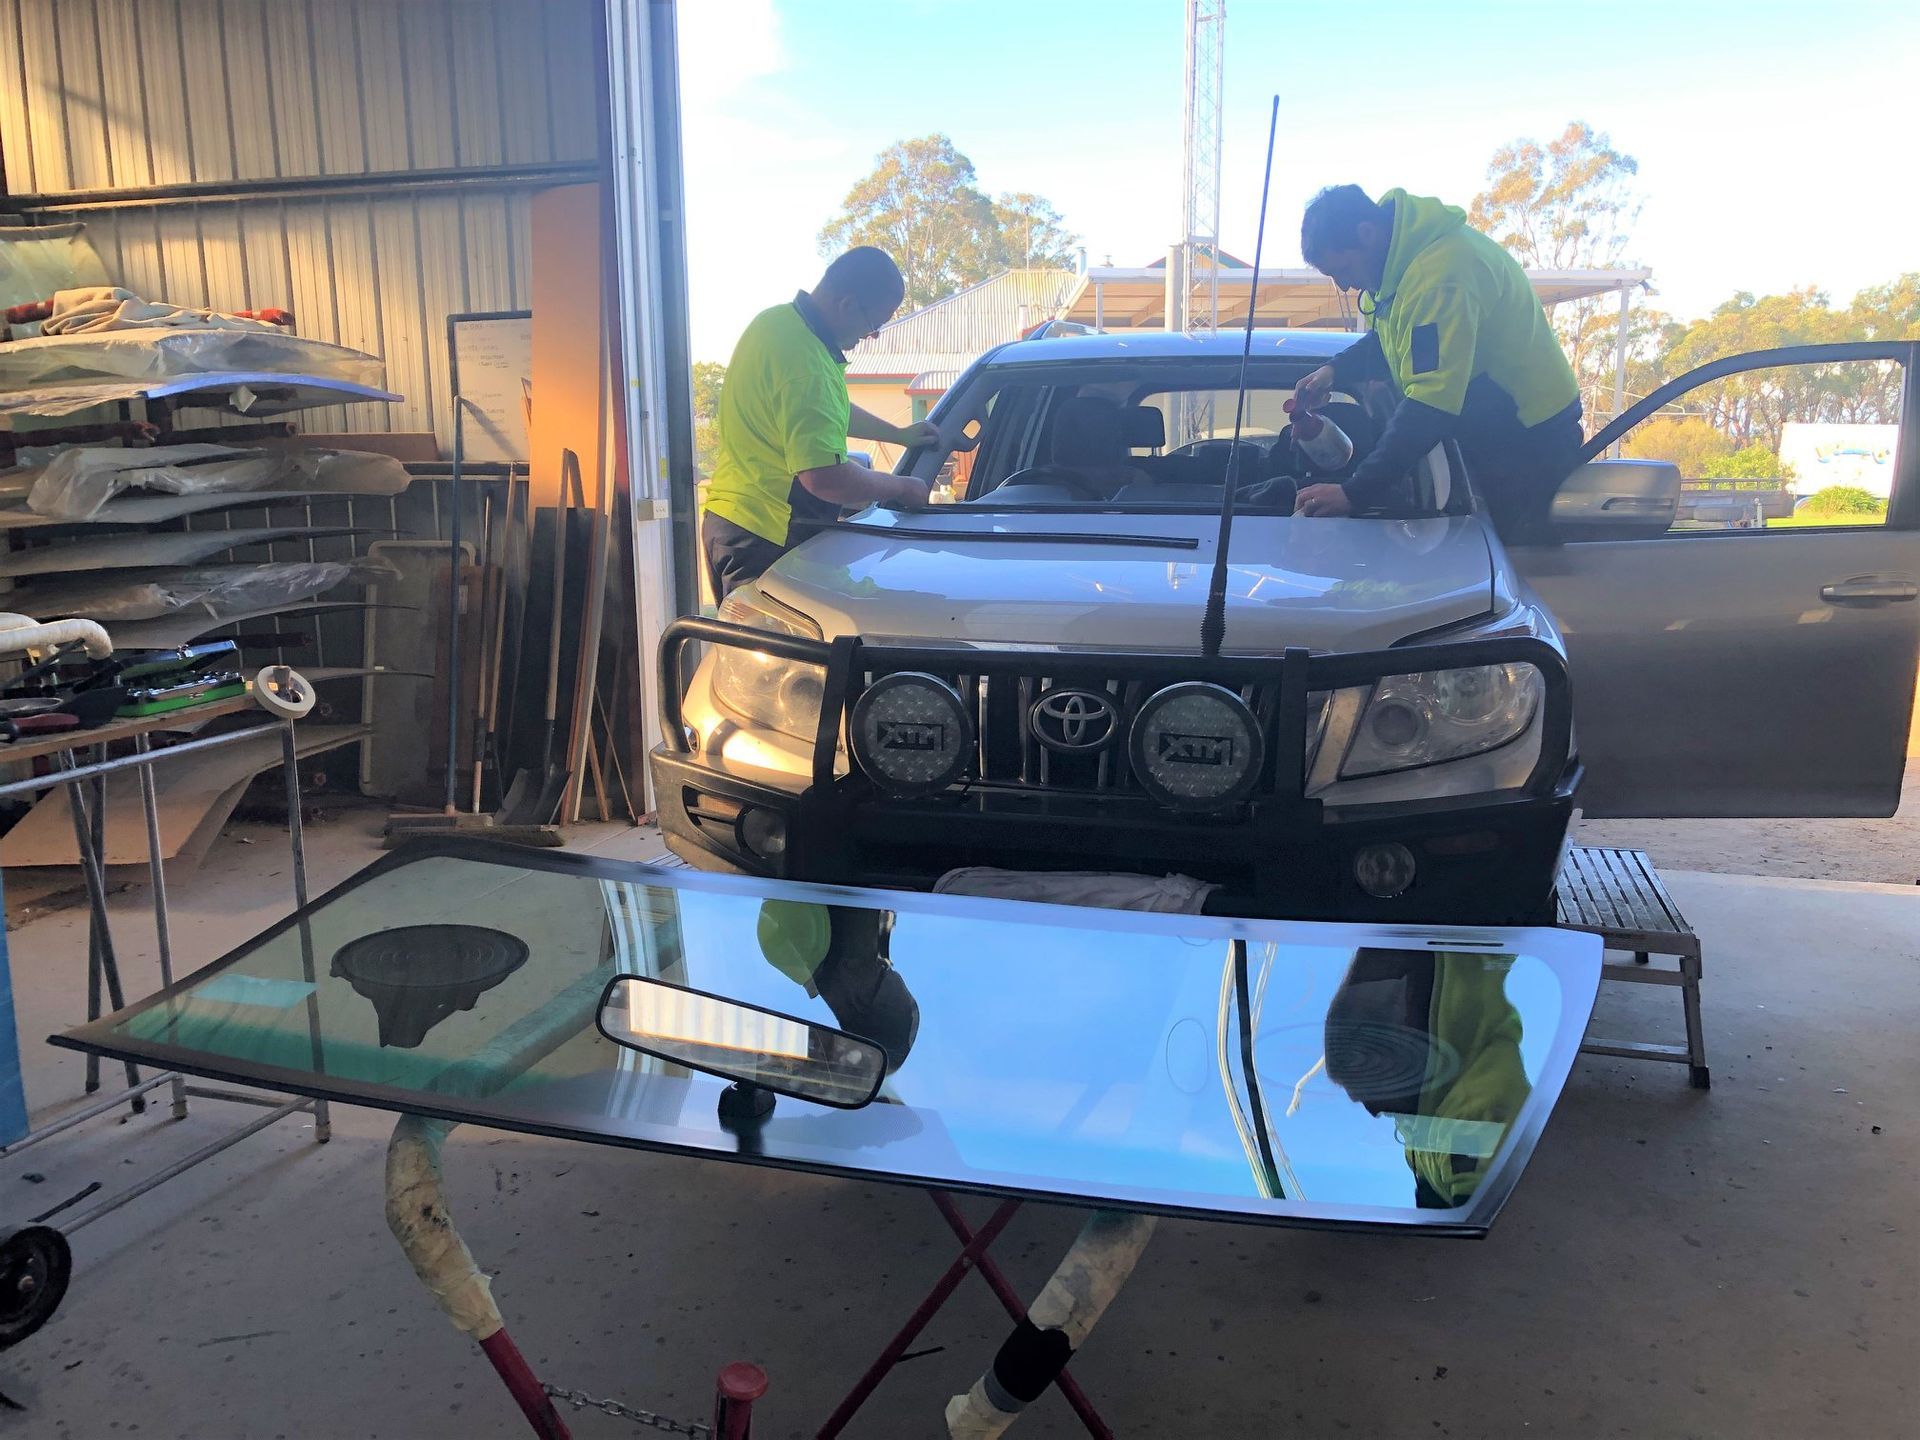 A Blue Car Already Installed a Windscreen and Ready to Out | Lucknow, VIC | Bairnsdale Windscreens